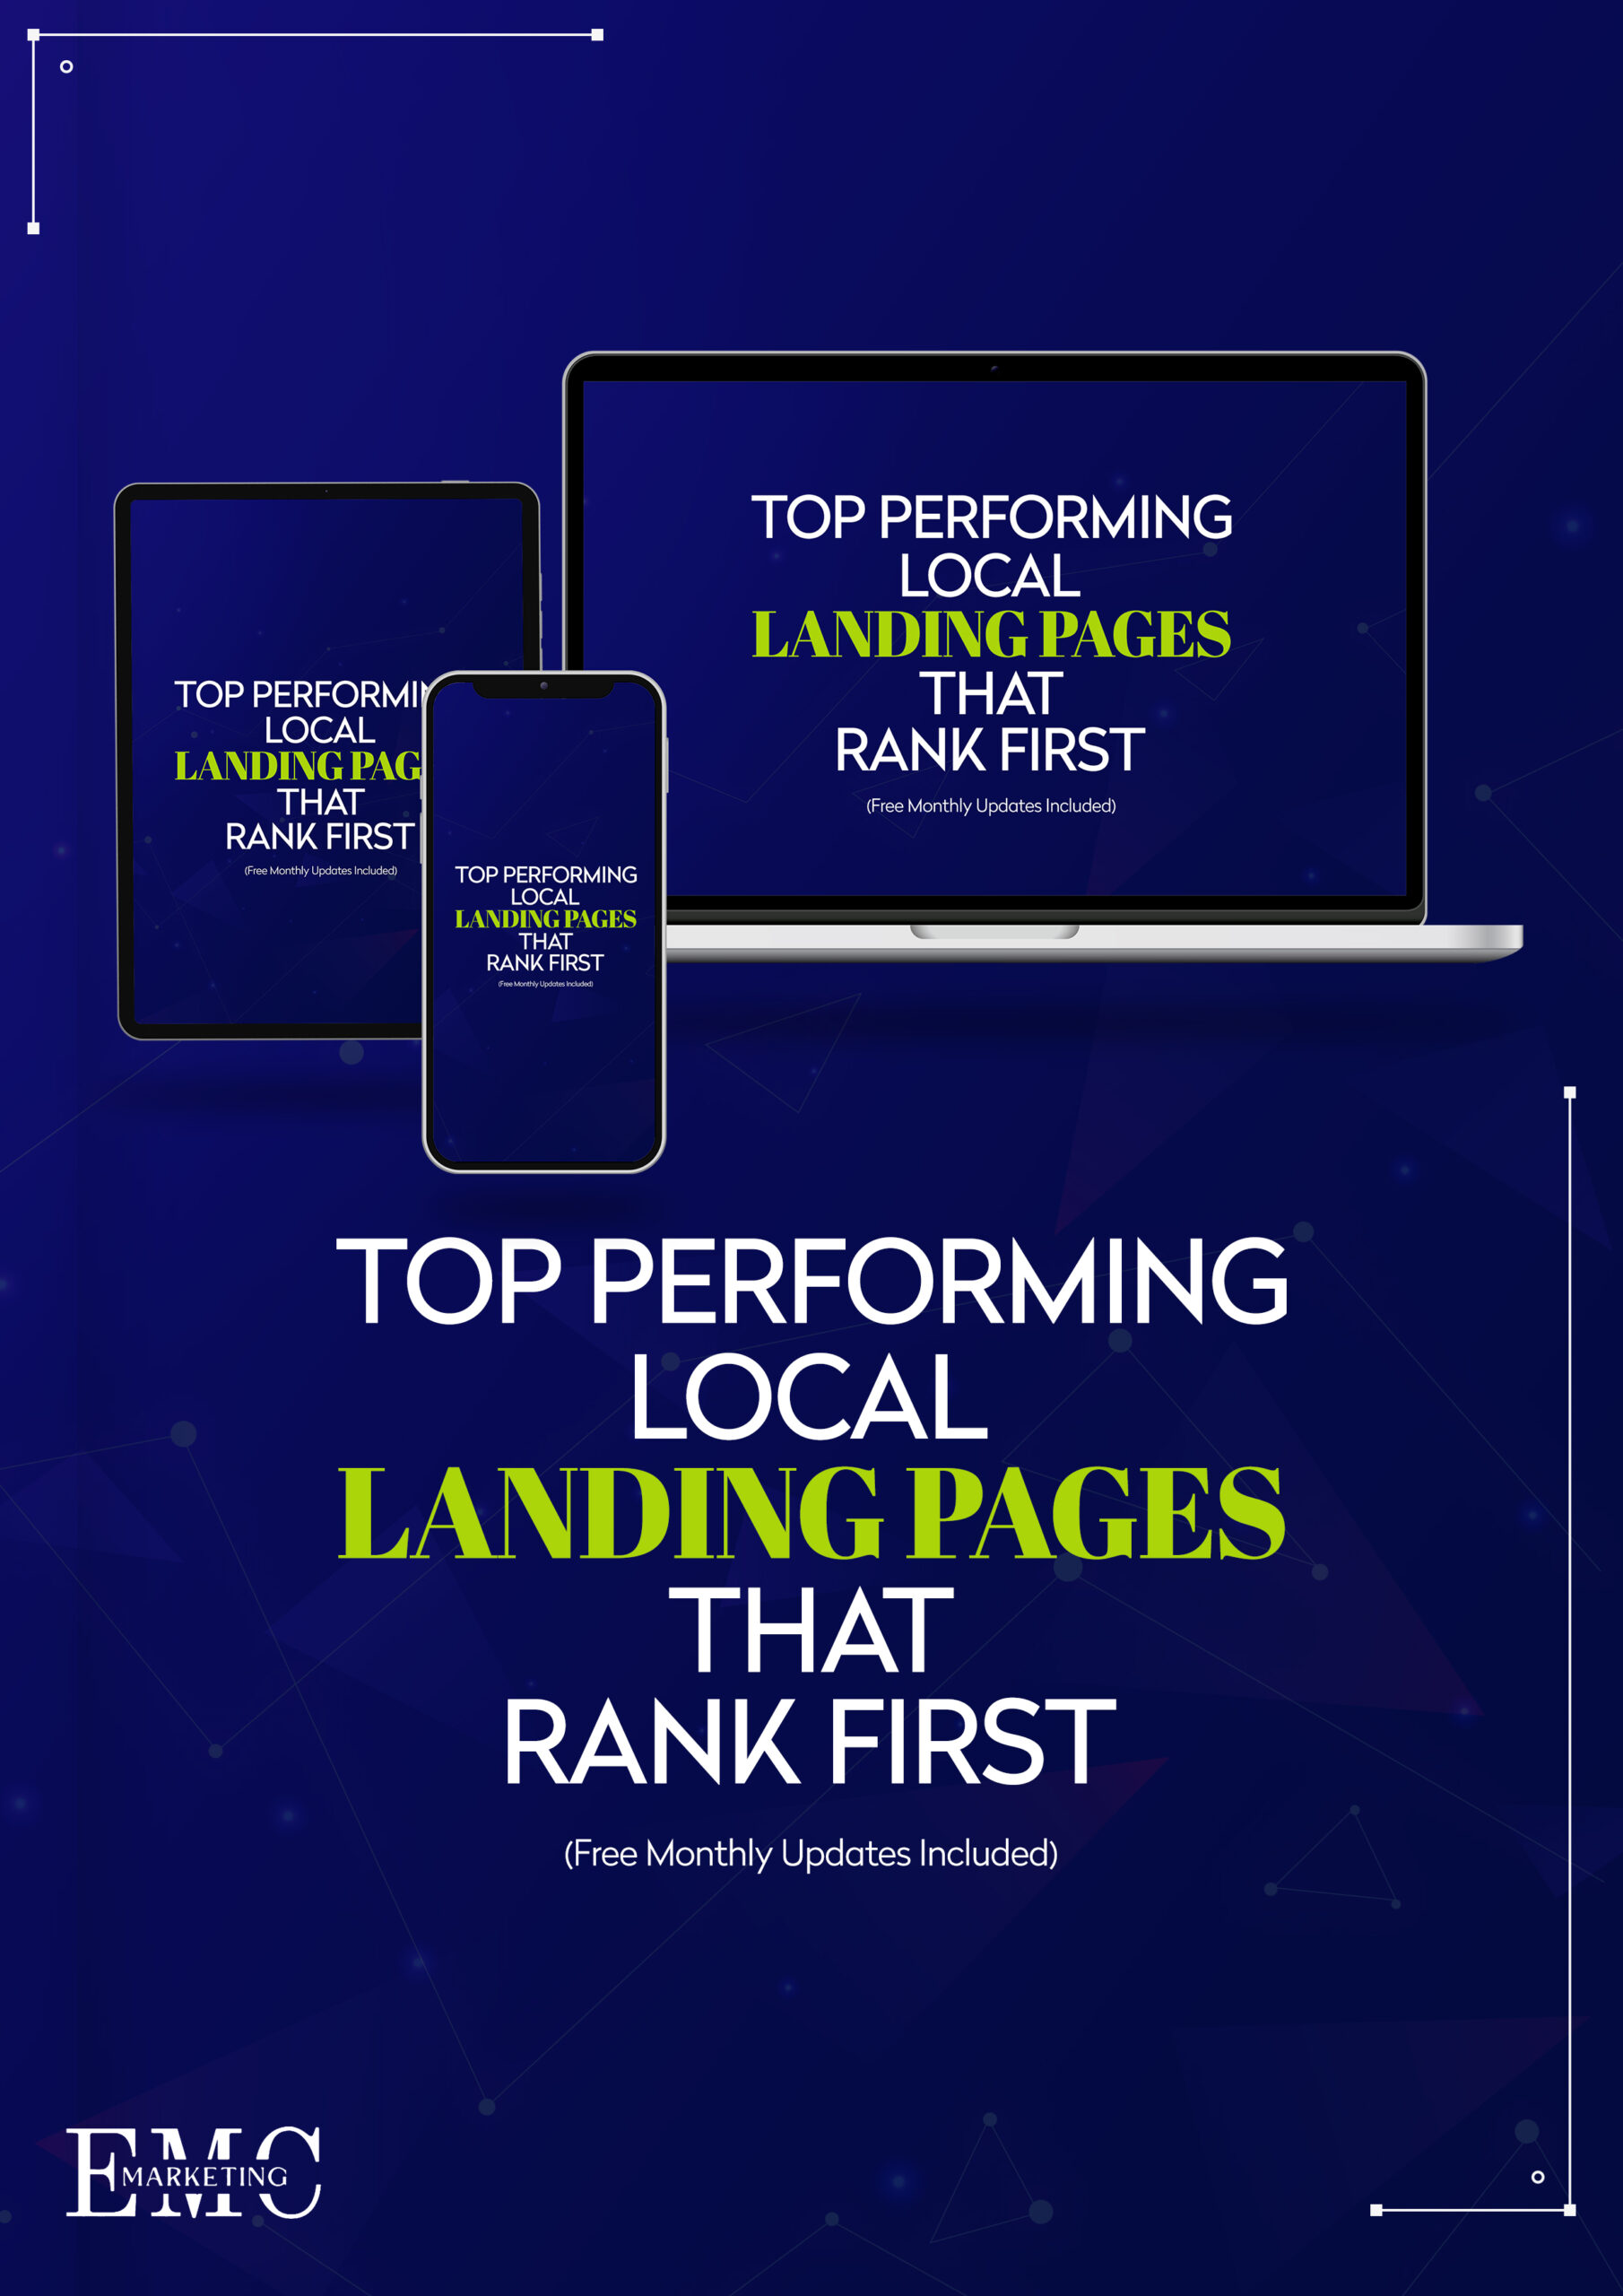 Top Landing Pages That Rank